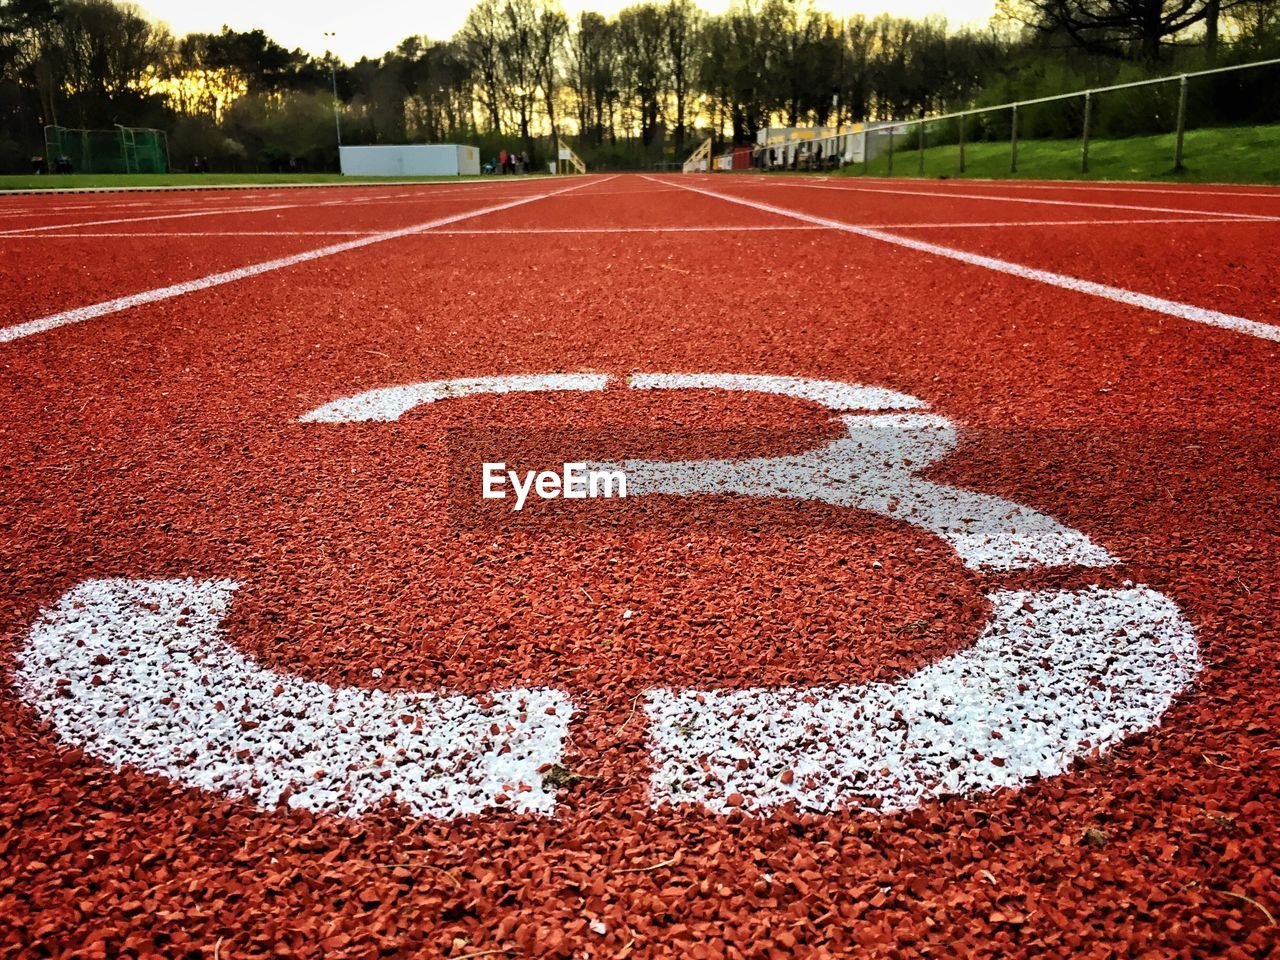 Close-up of number on running track